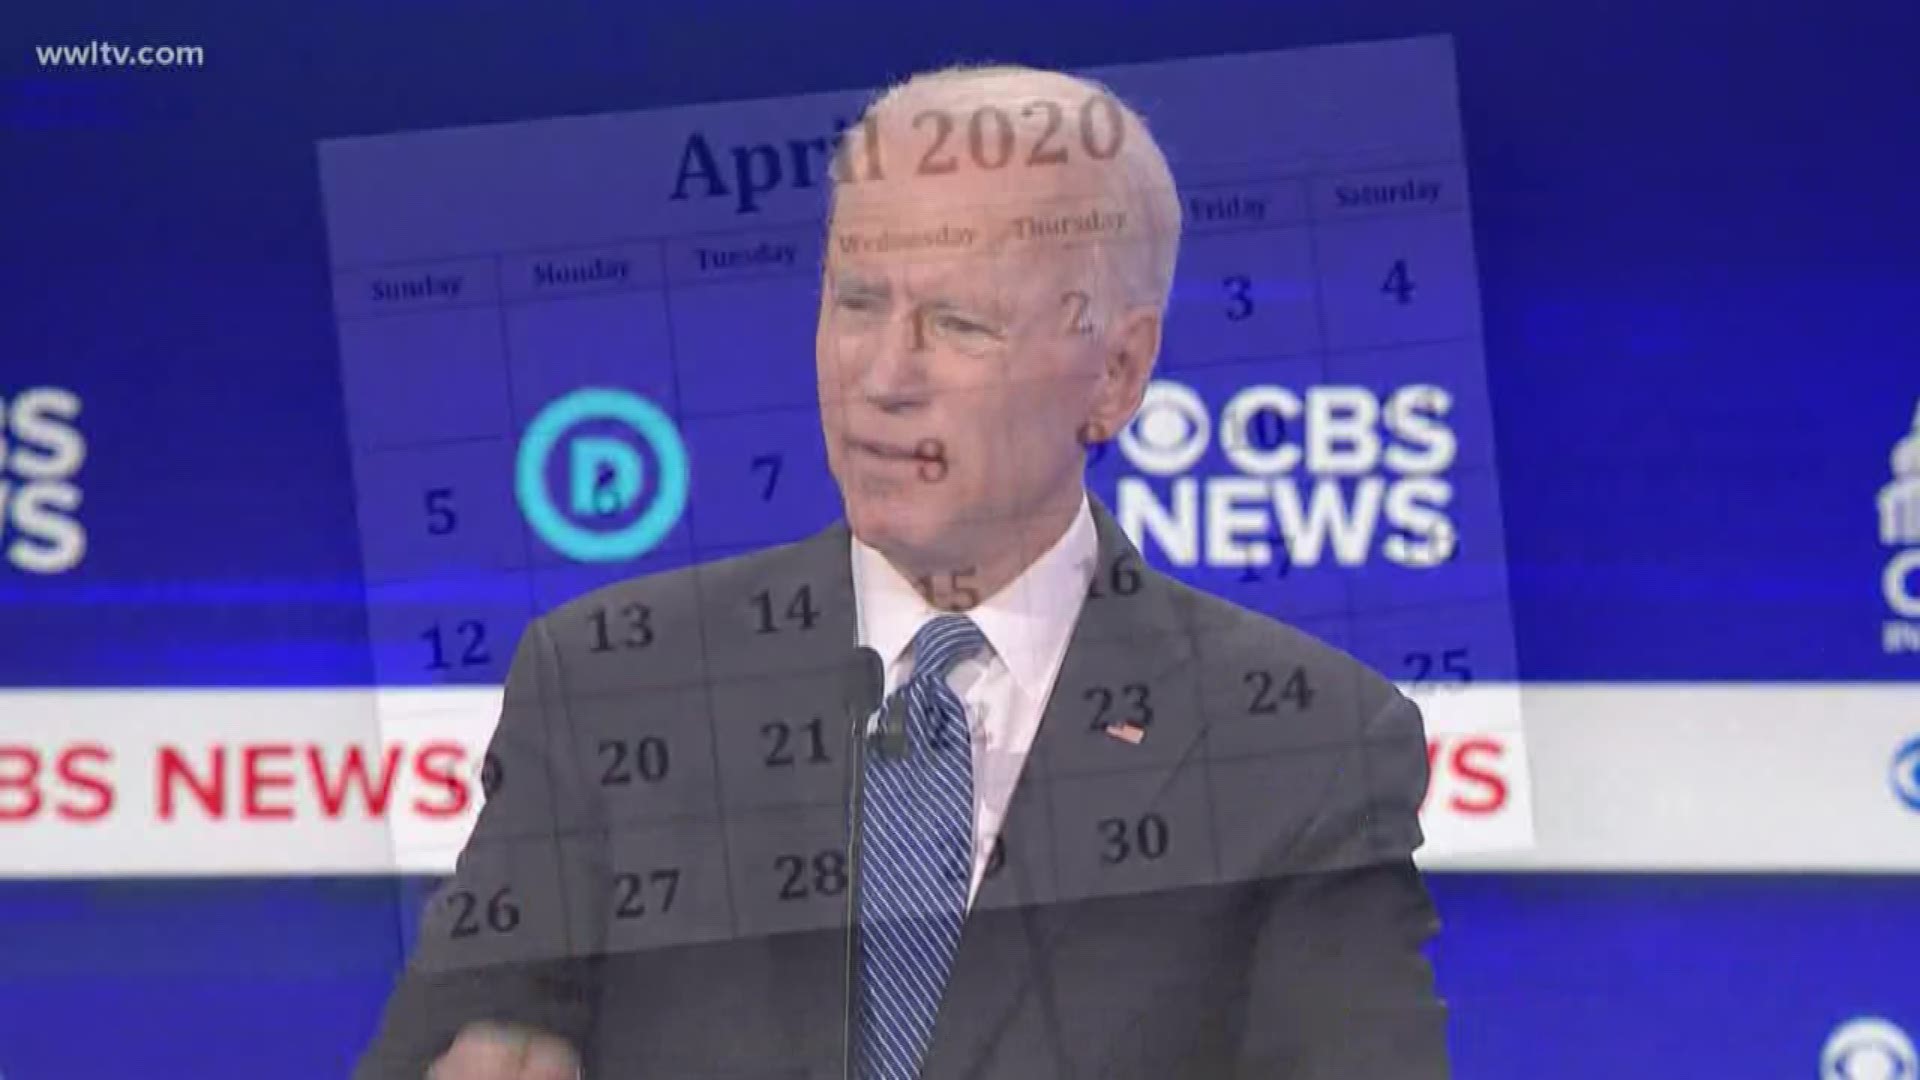 'If Biden keeps moving the way he has been he should have the nomination locked up by March 17'